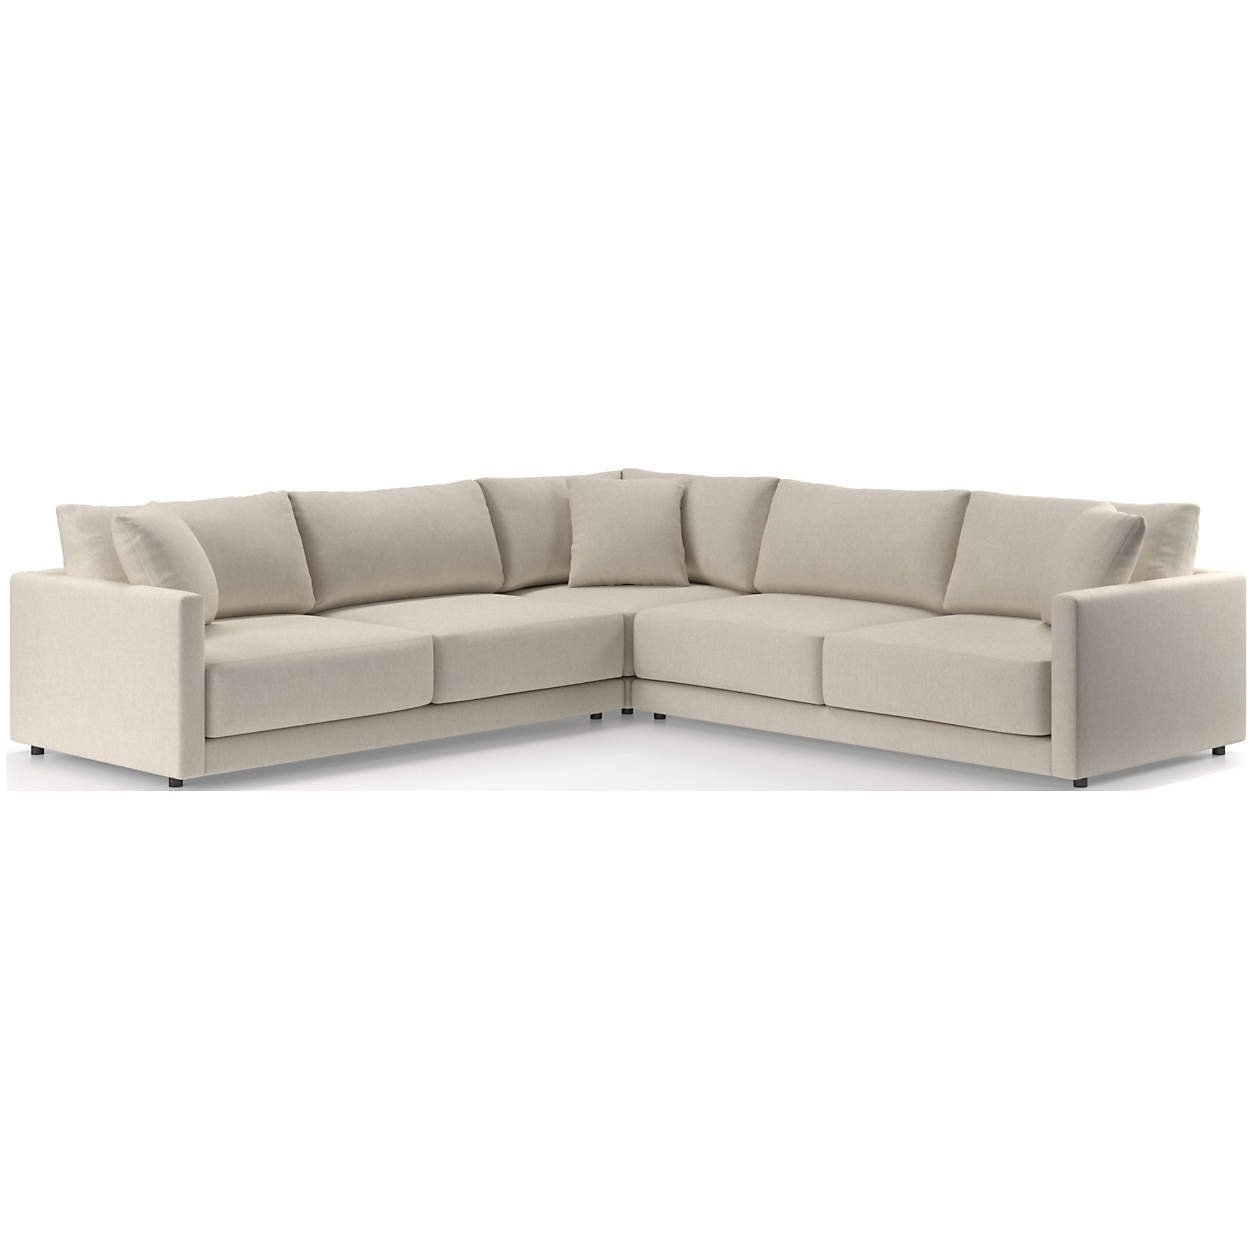 Gather 3-Piece Sectional - Image 1